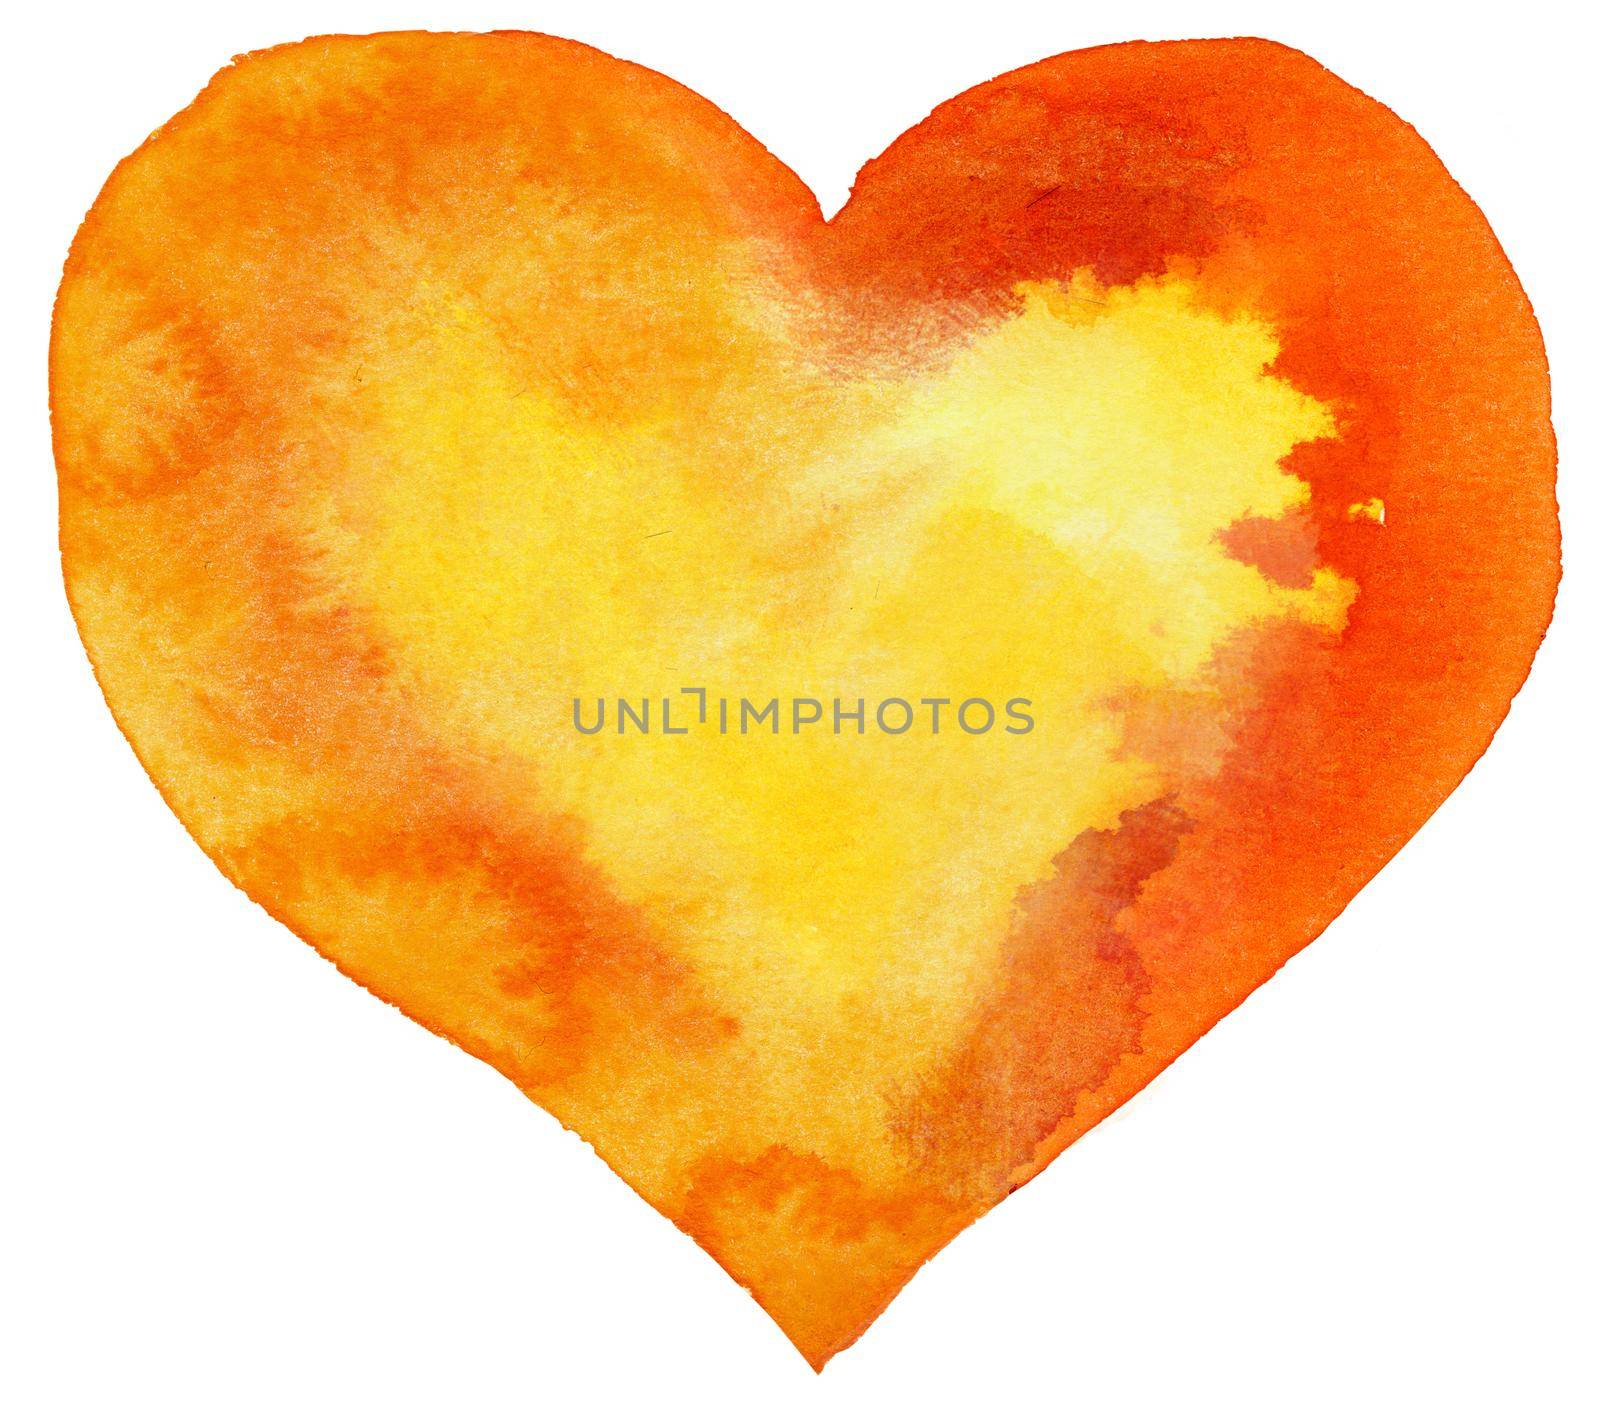 watercolor orange heart with yellow center by NataOmsk